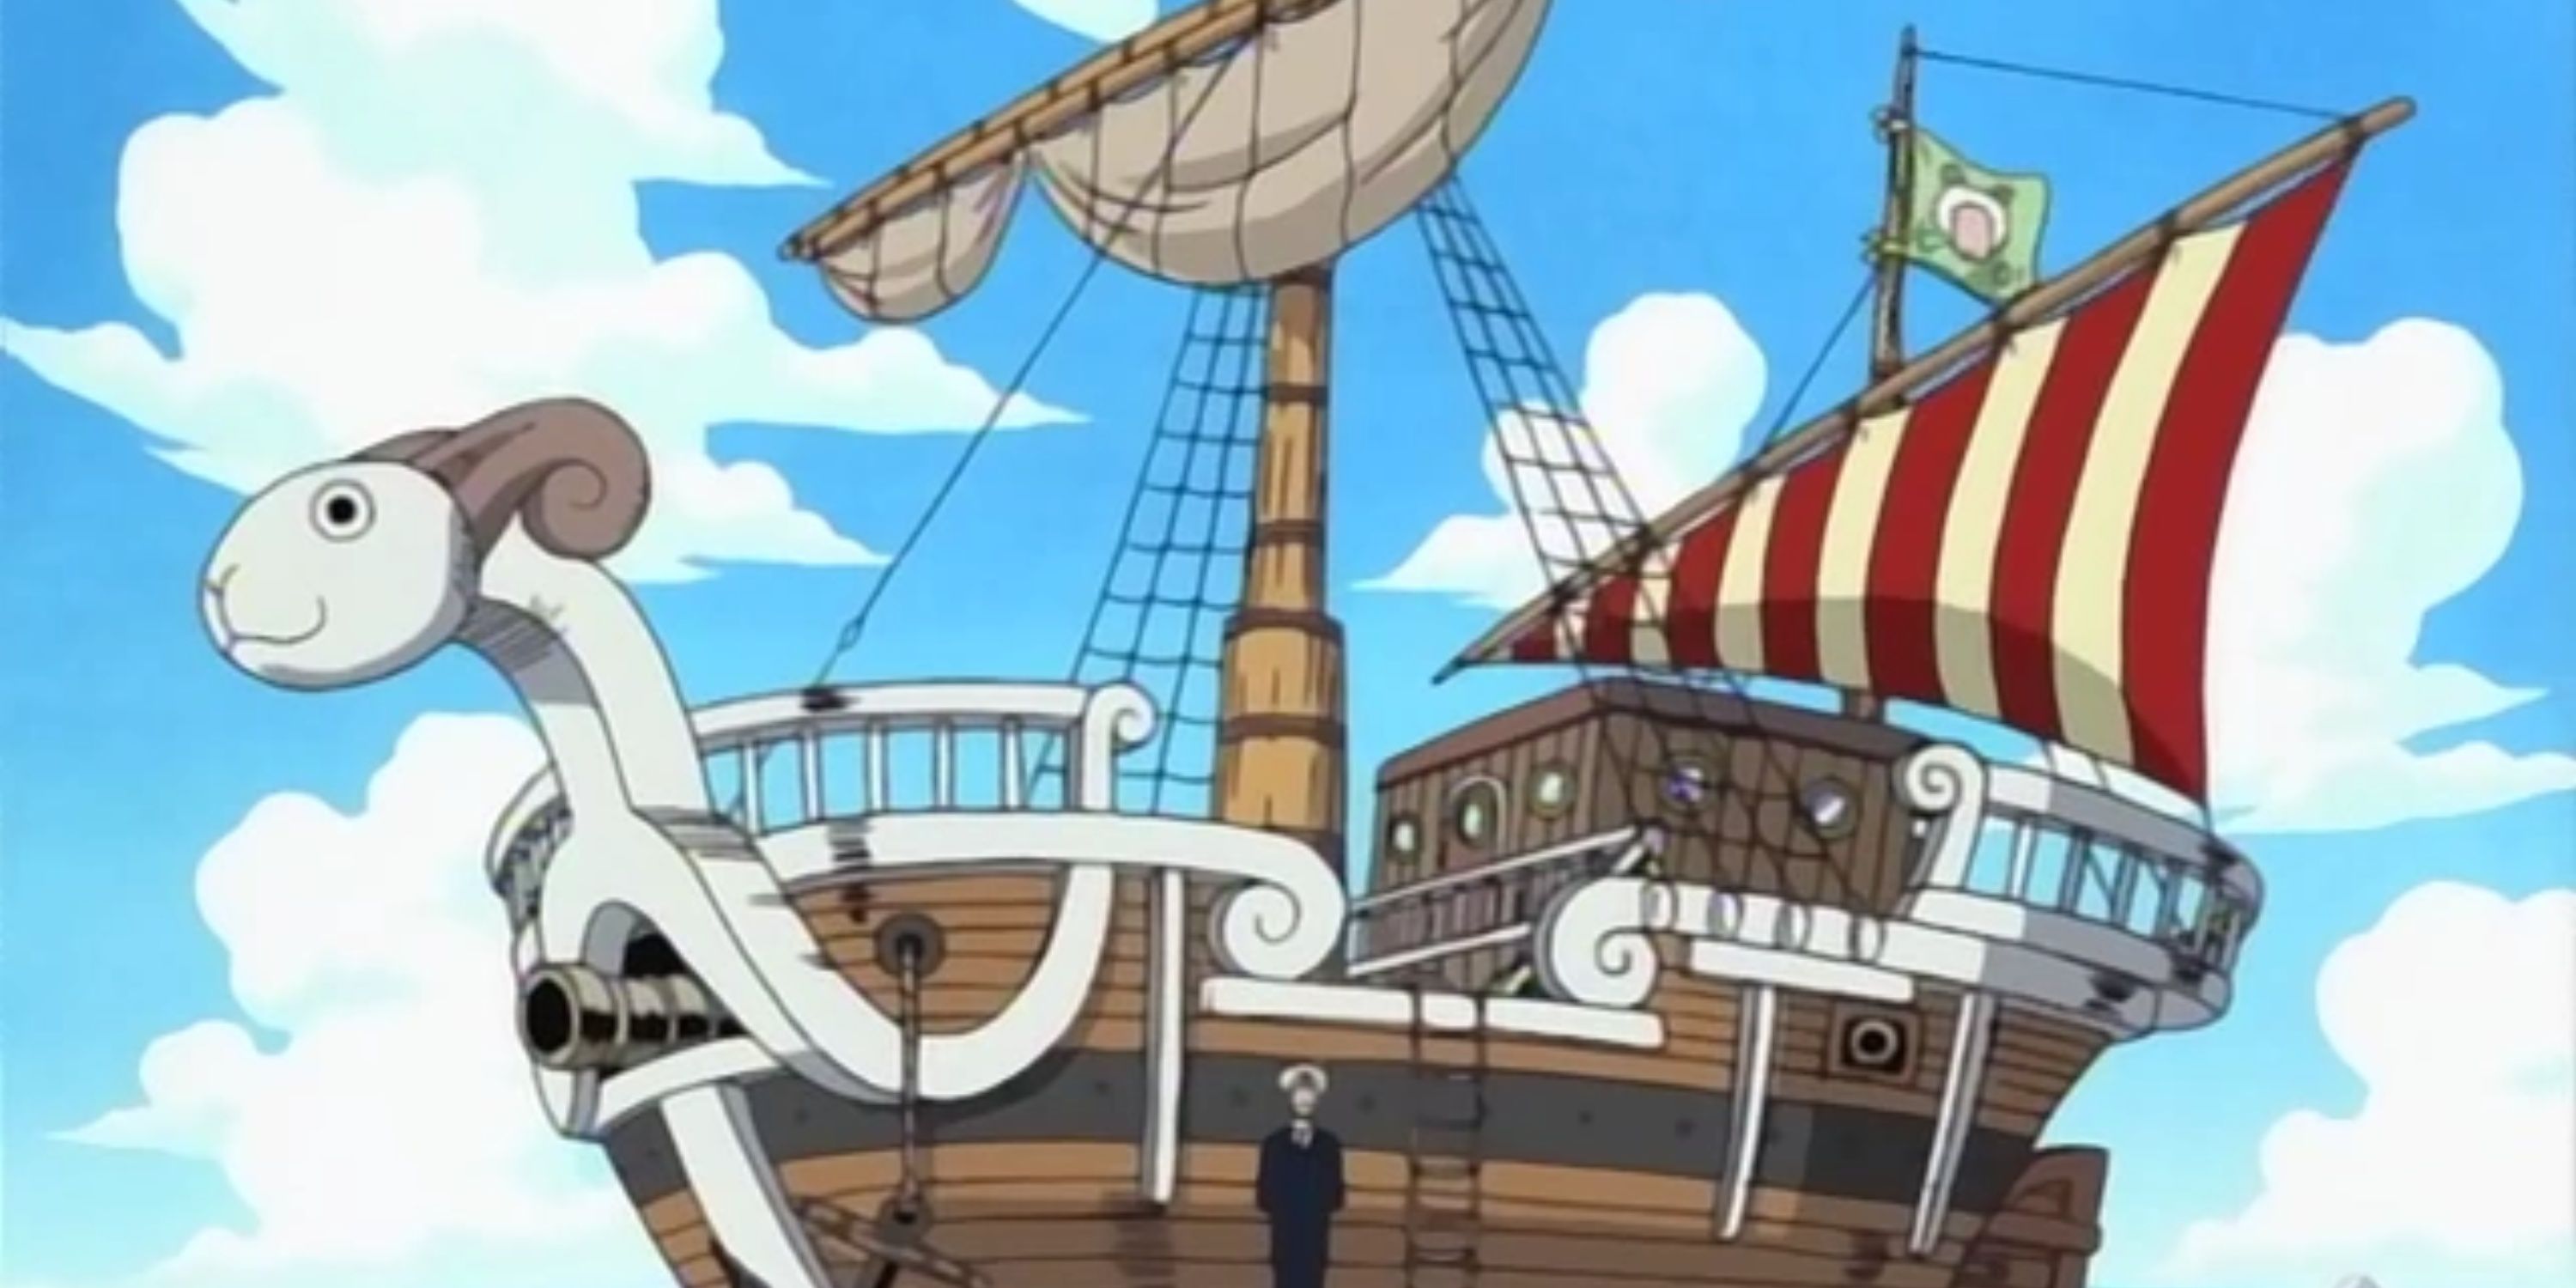 Merry stands in front of the Going Merry in One Piece's Syrup Village Arc